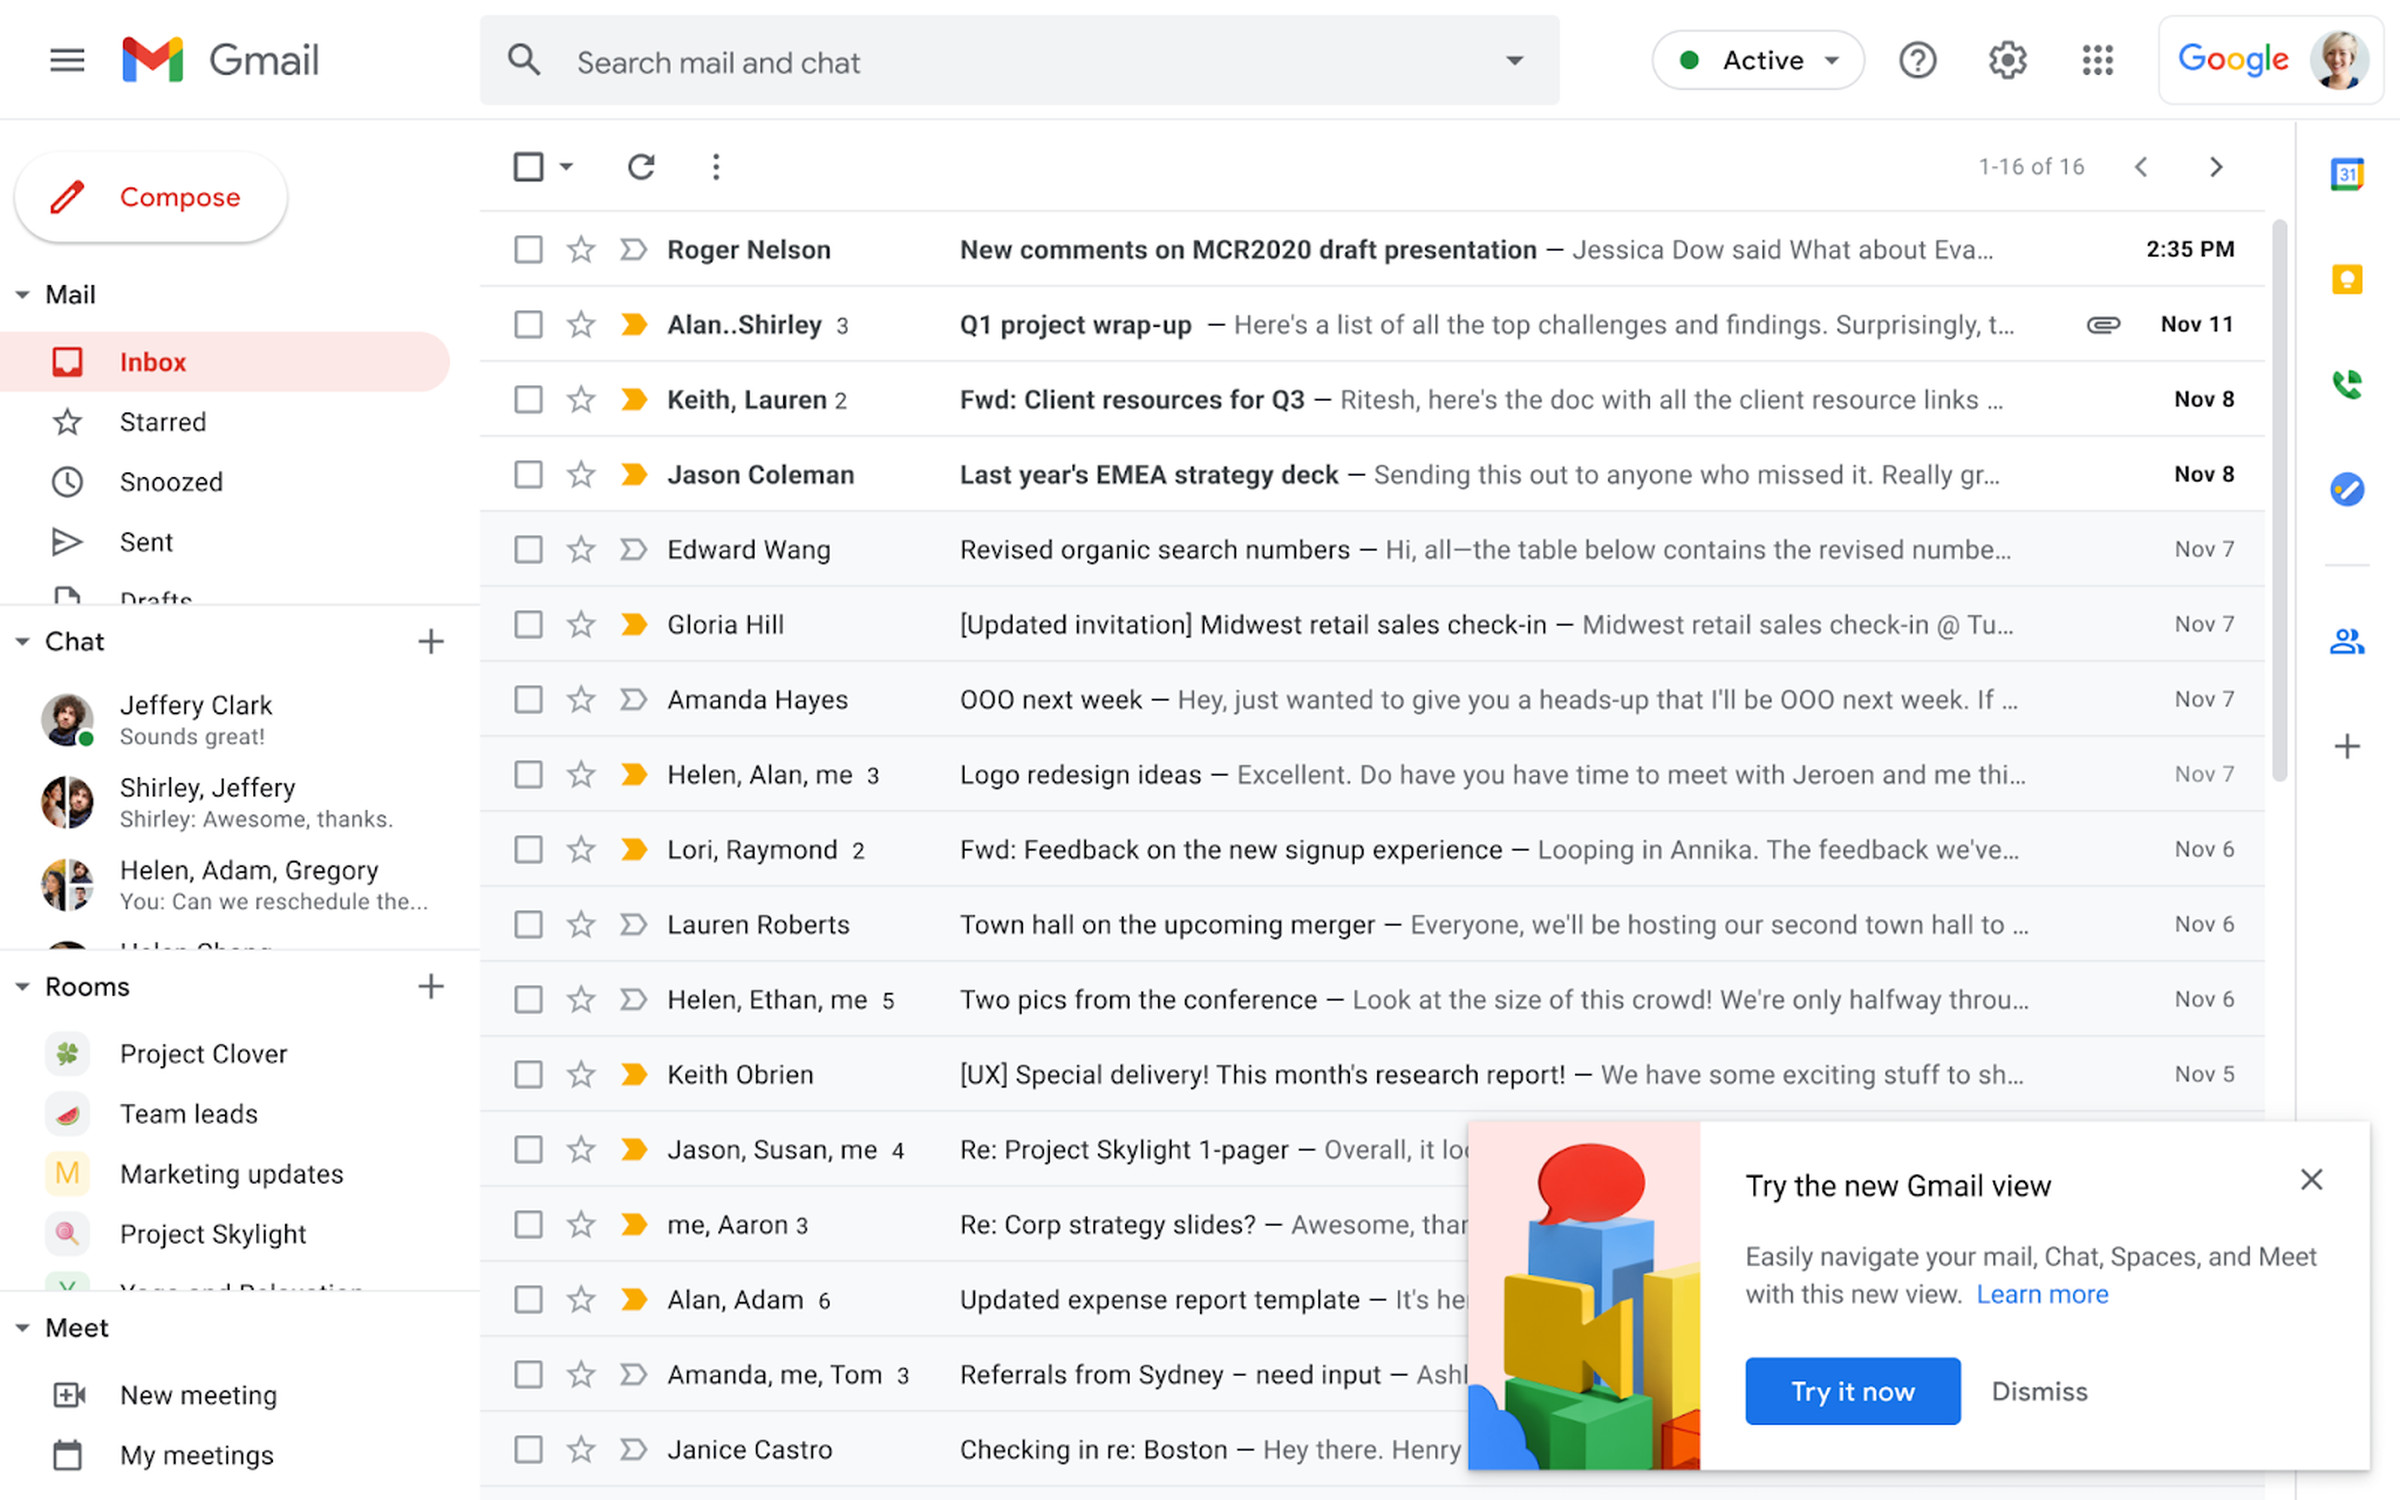 Google’s blog includes an image of the current, old Gmail interface with a pop-up asking if you want to try the new view.